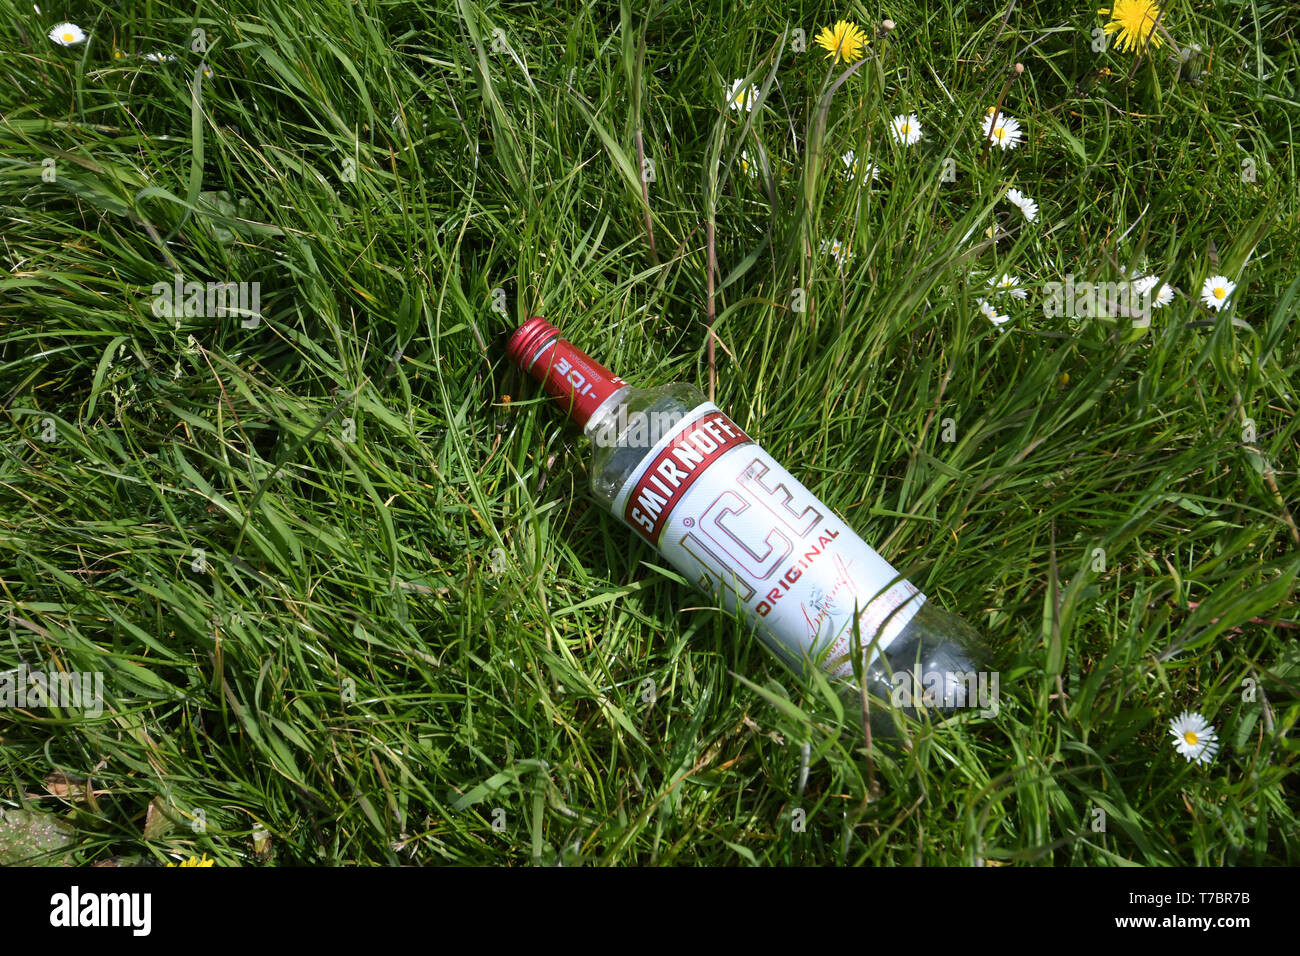 Parc Trammel Cove, Porthleven, Cornwall, UK. 6th May 2019. empty bottle of Vodka on the field ajoining the cliff. This is the scene of the cliff where 3 men fell 70ft off a cliff late Sunday night near the site of the Masked Ball, weekend Music festival. The injuries are serious and they are being treated at Derriford hospital Plymouth. The summer masked ball is a 3 day festival where attendees can camp on fields that are adjacent to the site of the accident. Credit Cwpix/ Alamy Live News. Stock Photo